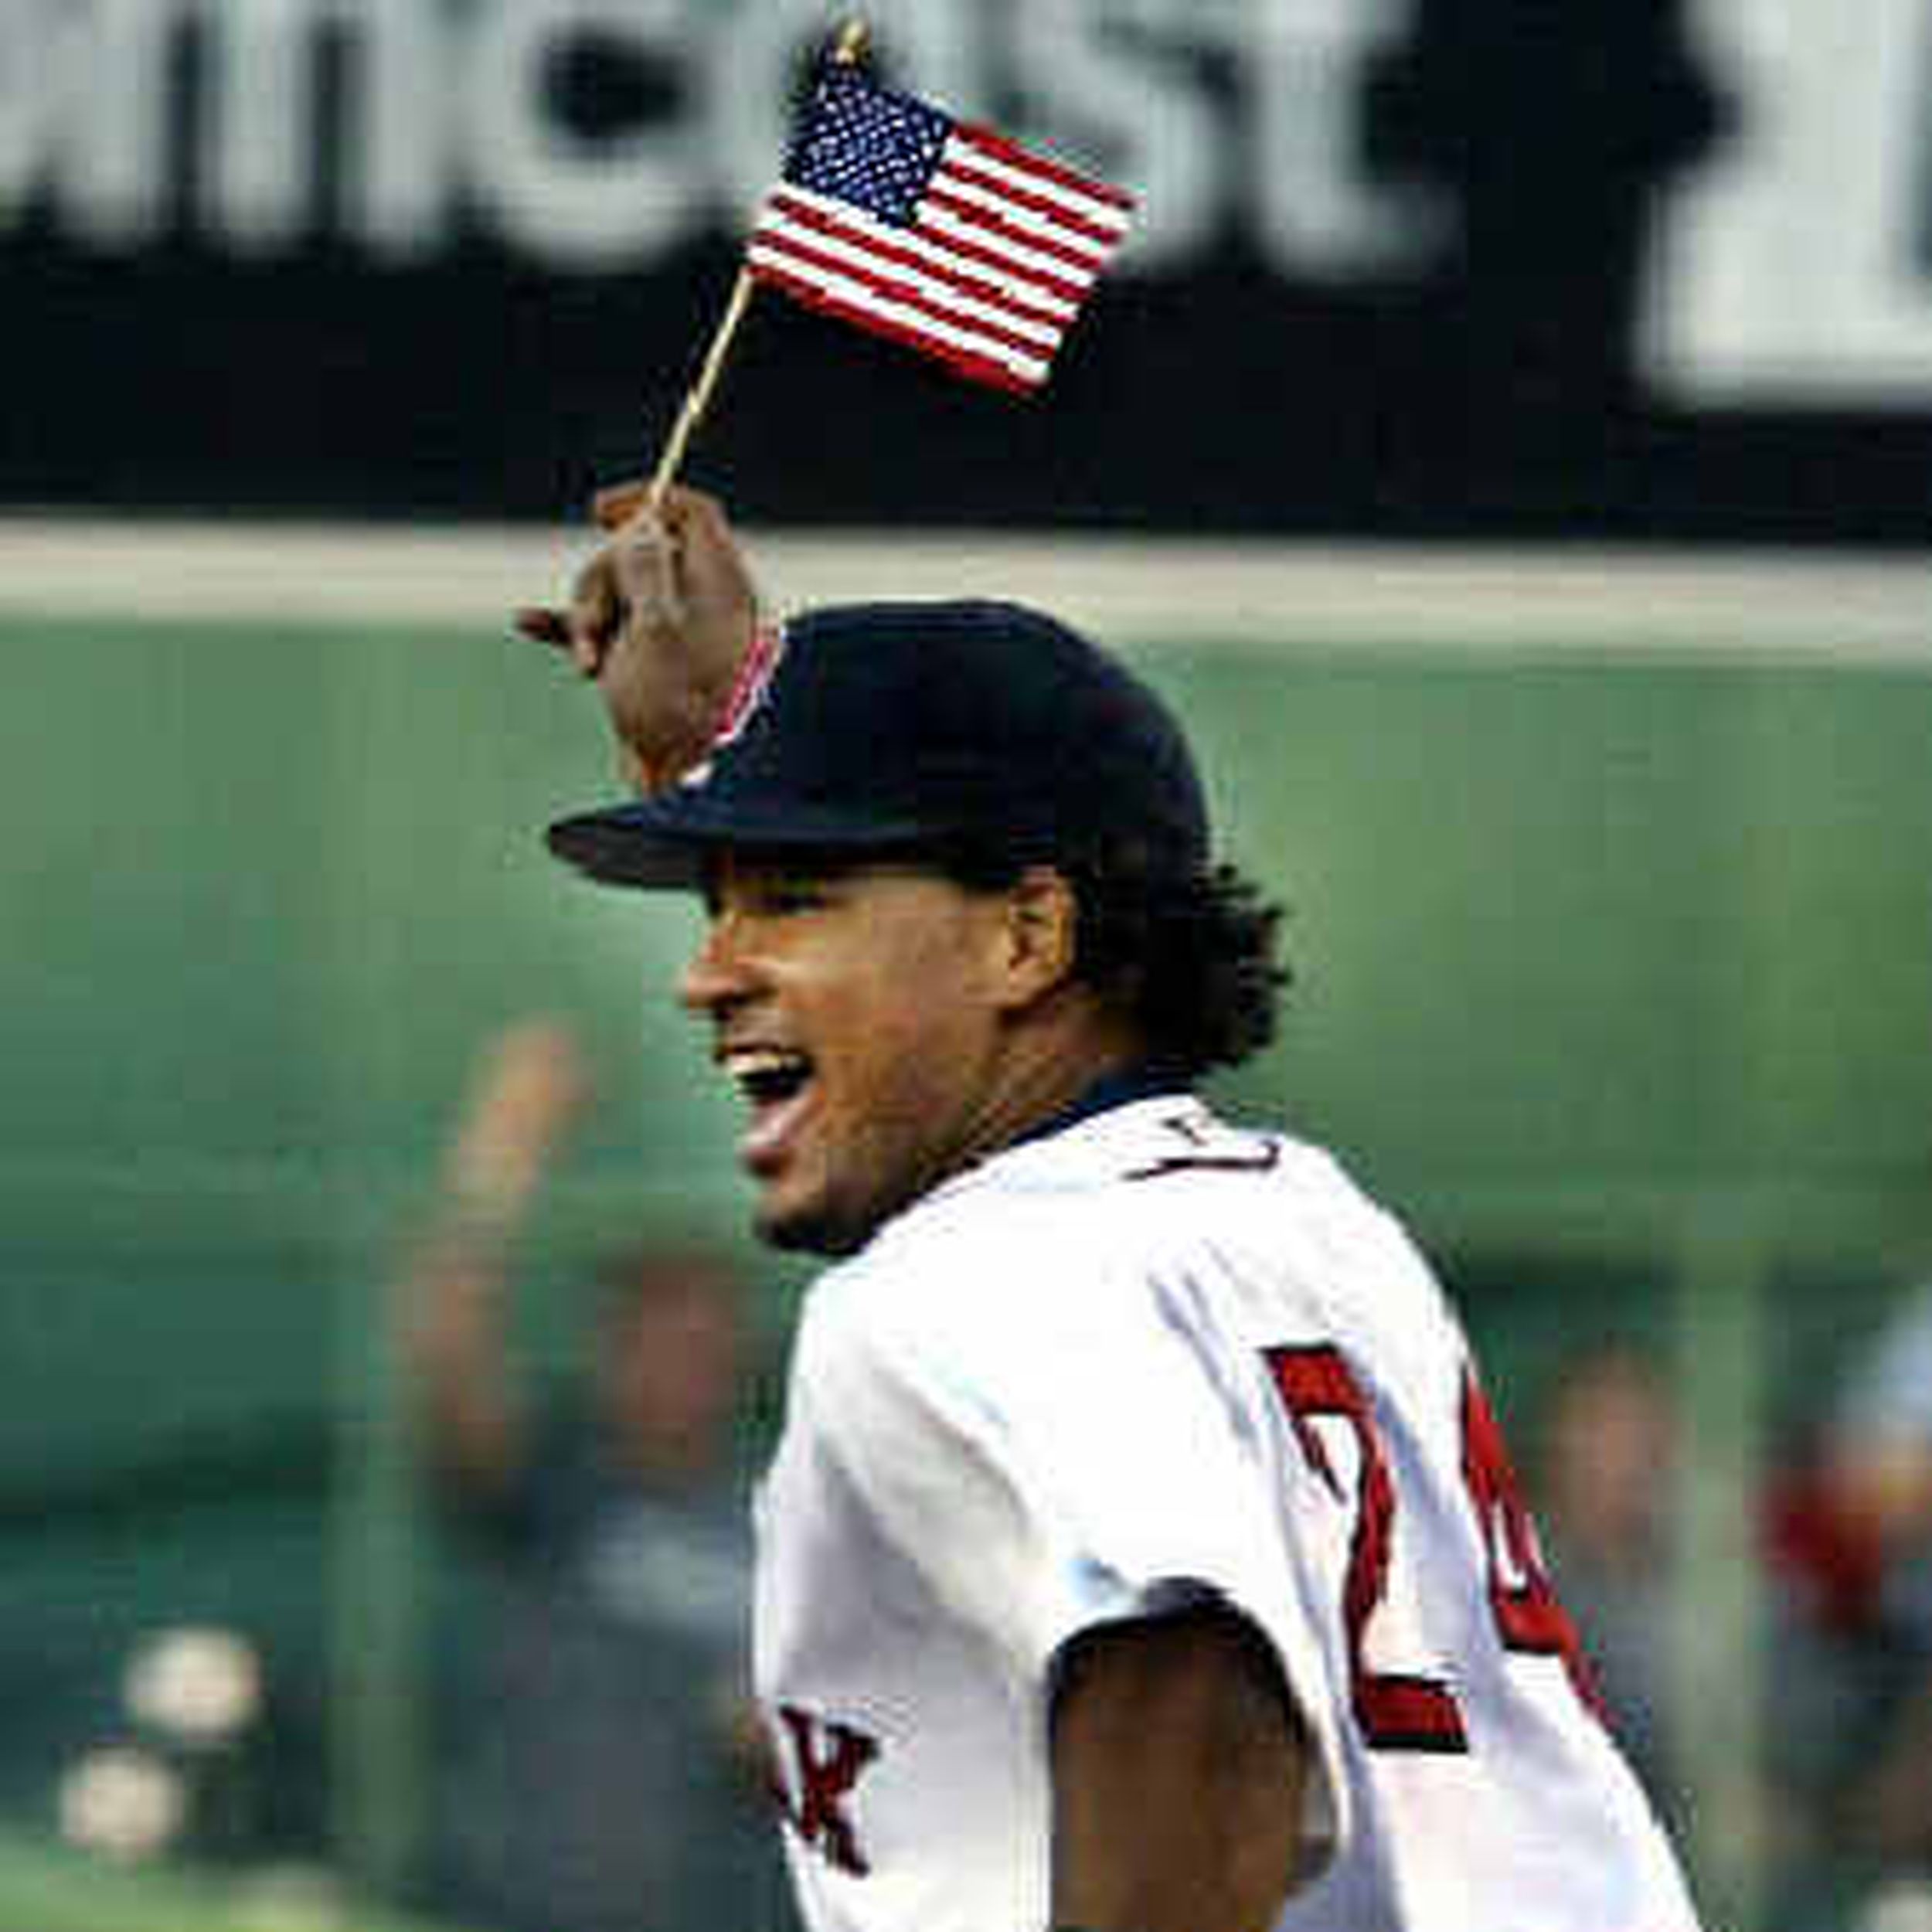 Manny leads Red Sox with American flag in 2004 